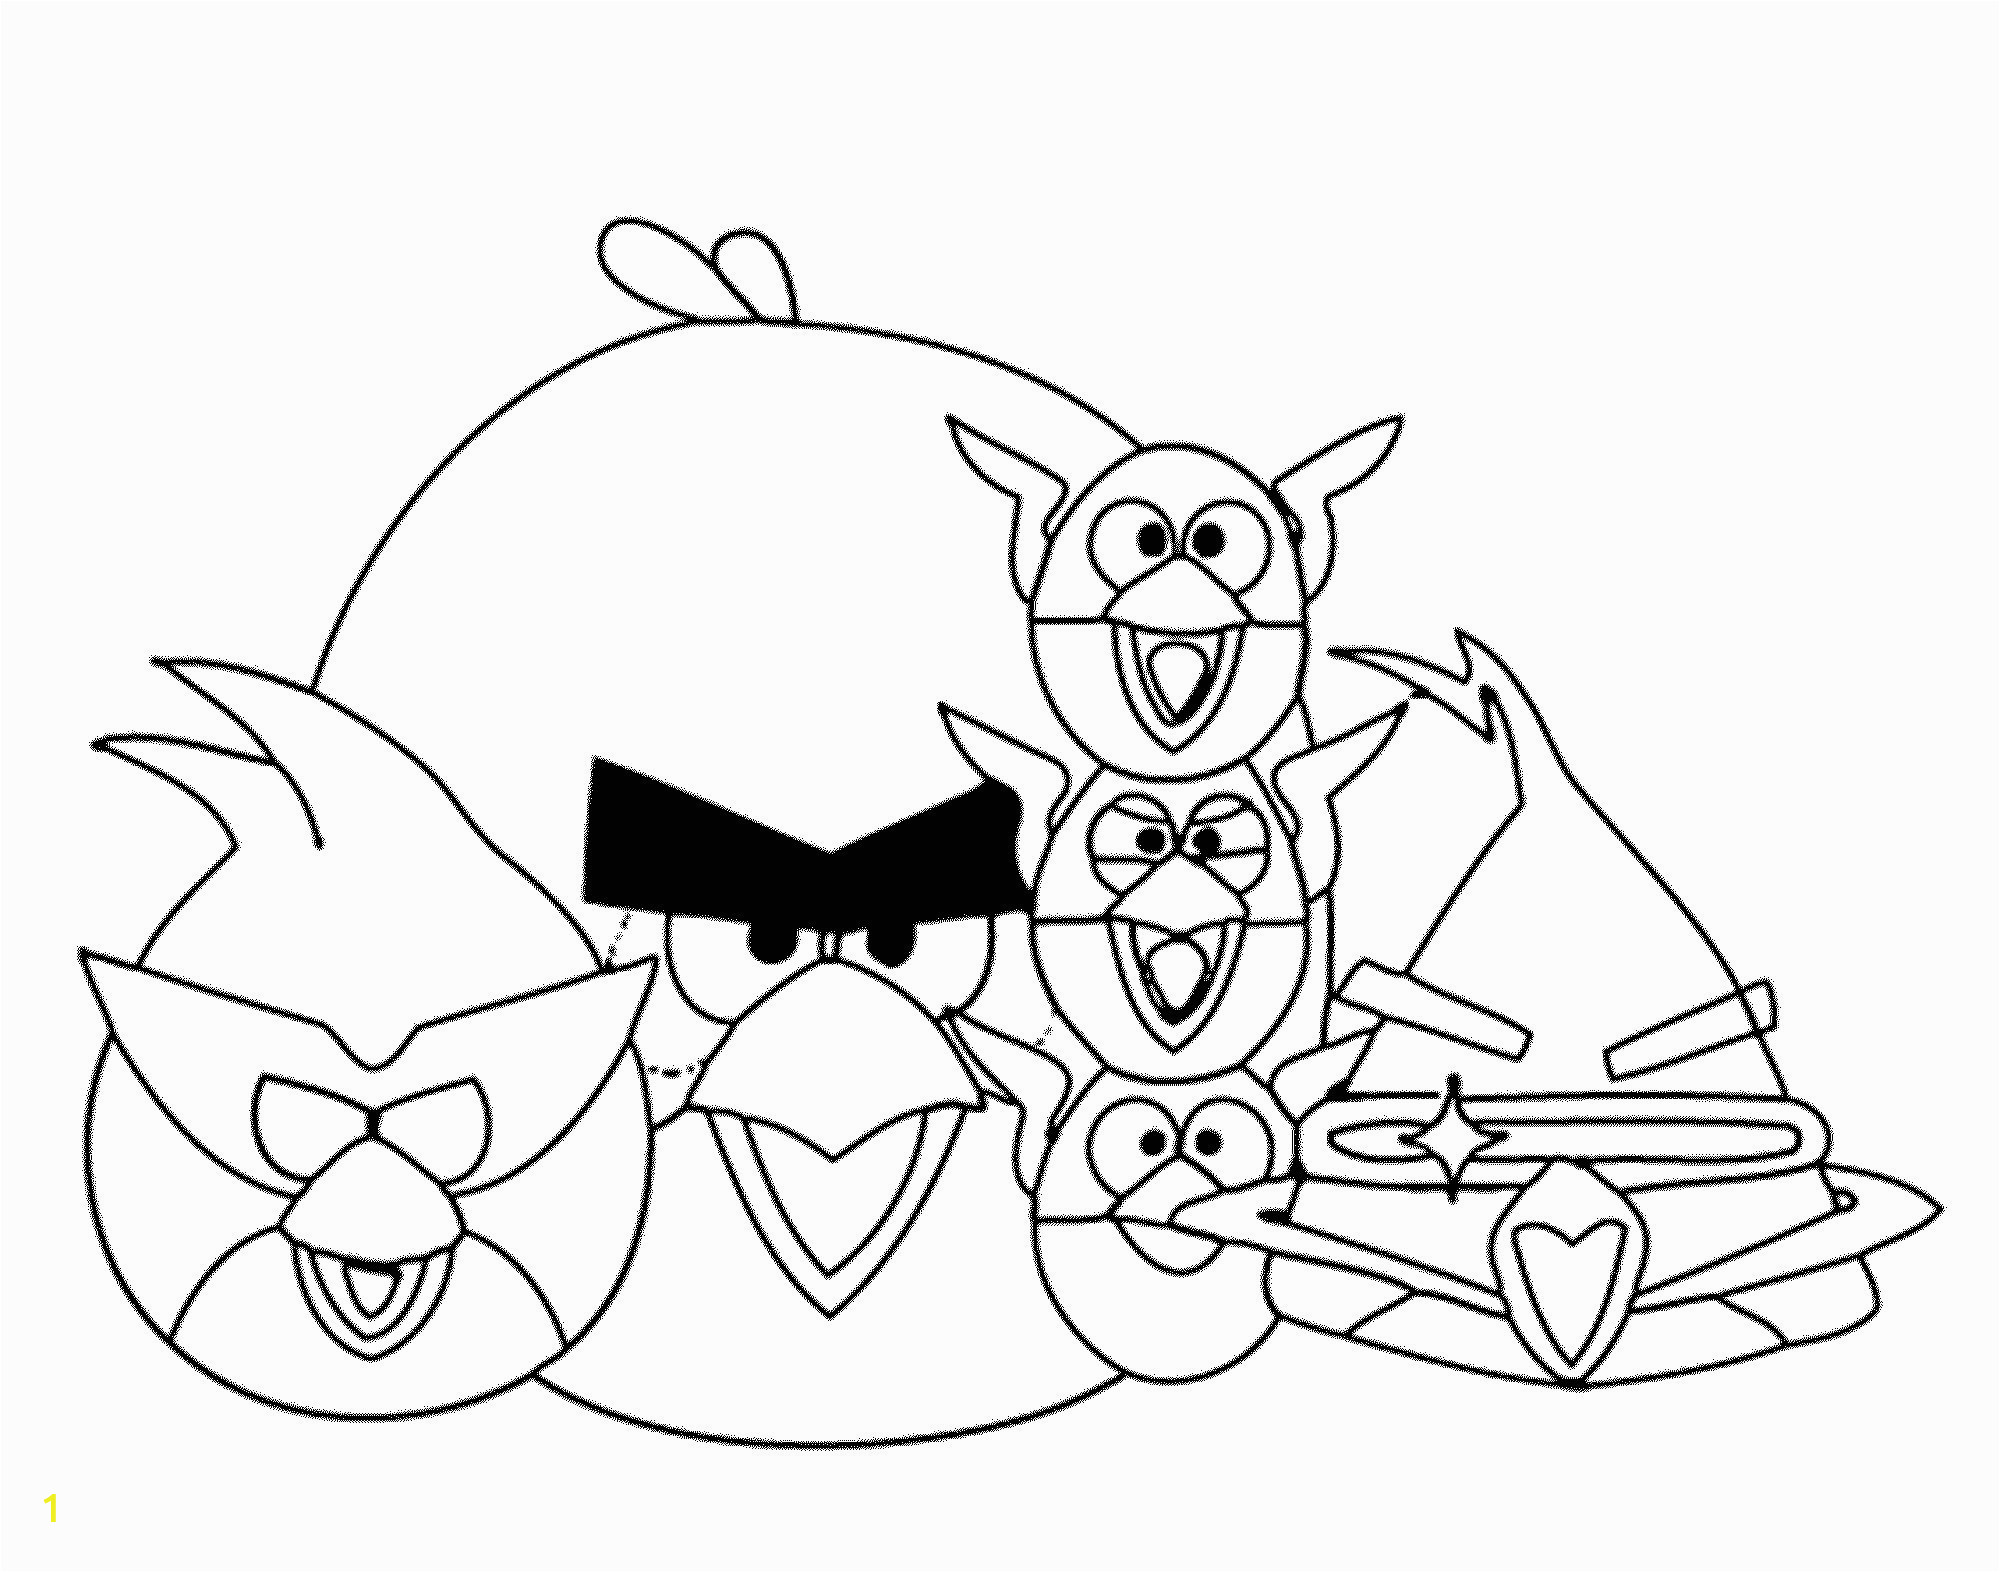 angry birds star wars coloring pages